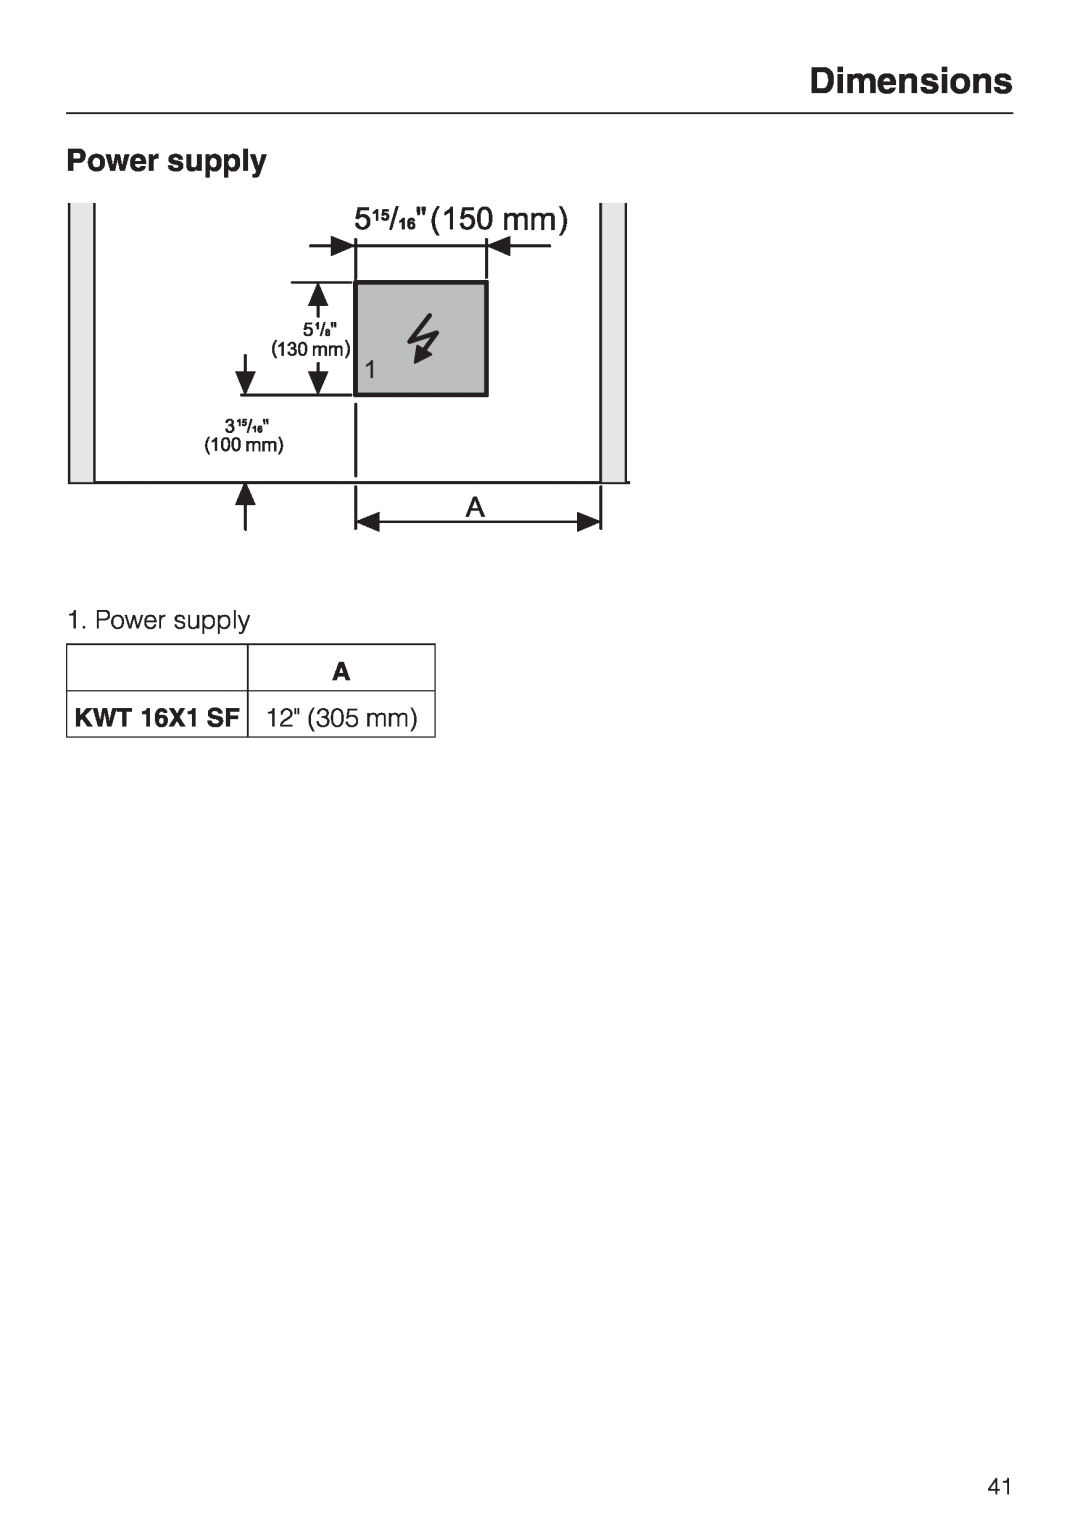 Miele KWT 1611 SF, KWT 1601 SF installation instructions Power supply, A KWT 16X1 SF 12 305 mm, Dimensions 